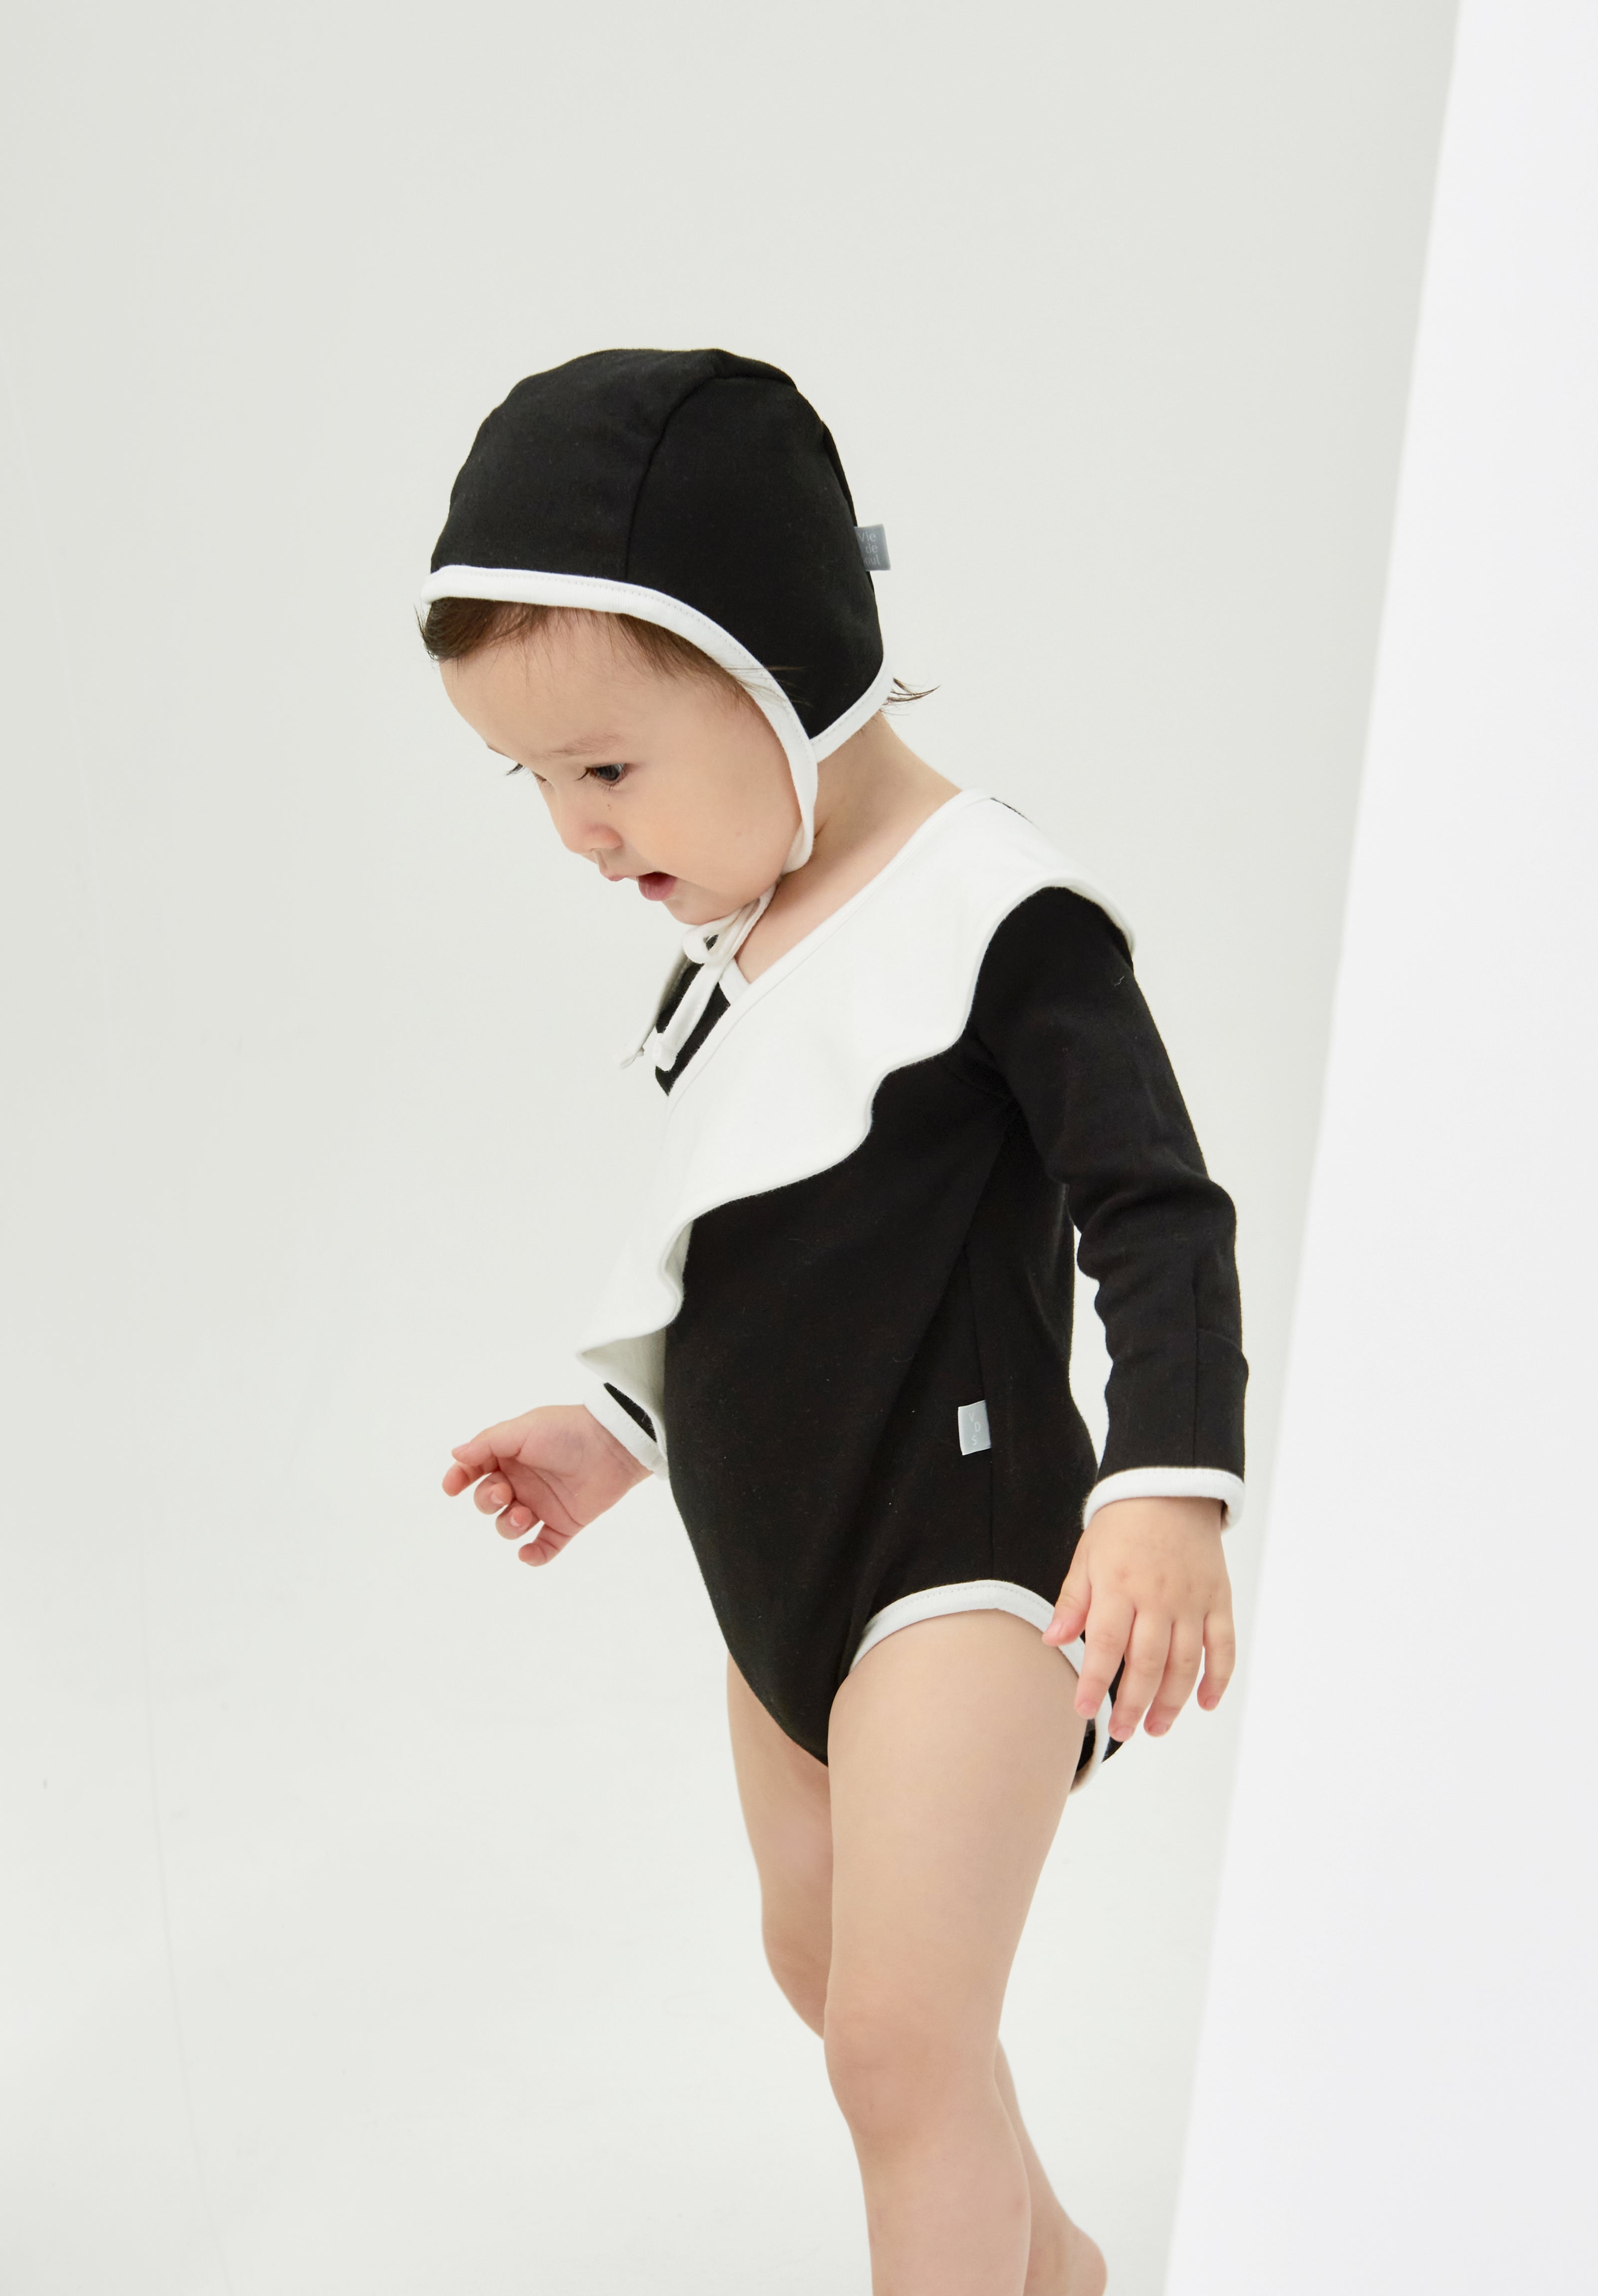 Bonnet Hat (Black): Lovely bonnet hat for babies, gentle when tied under the chin. Lightweight and wrinkle-free for easy carrying.